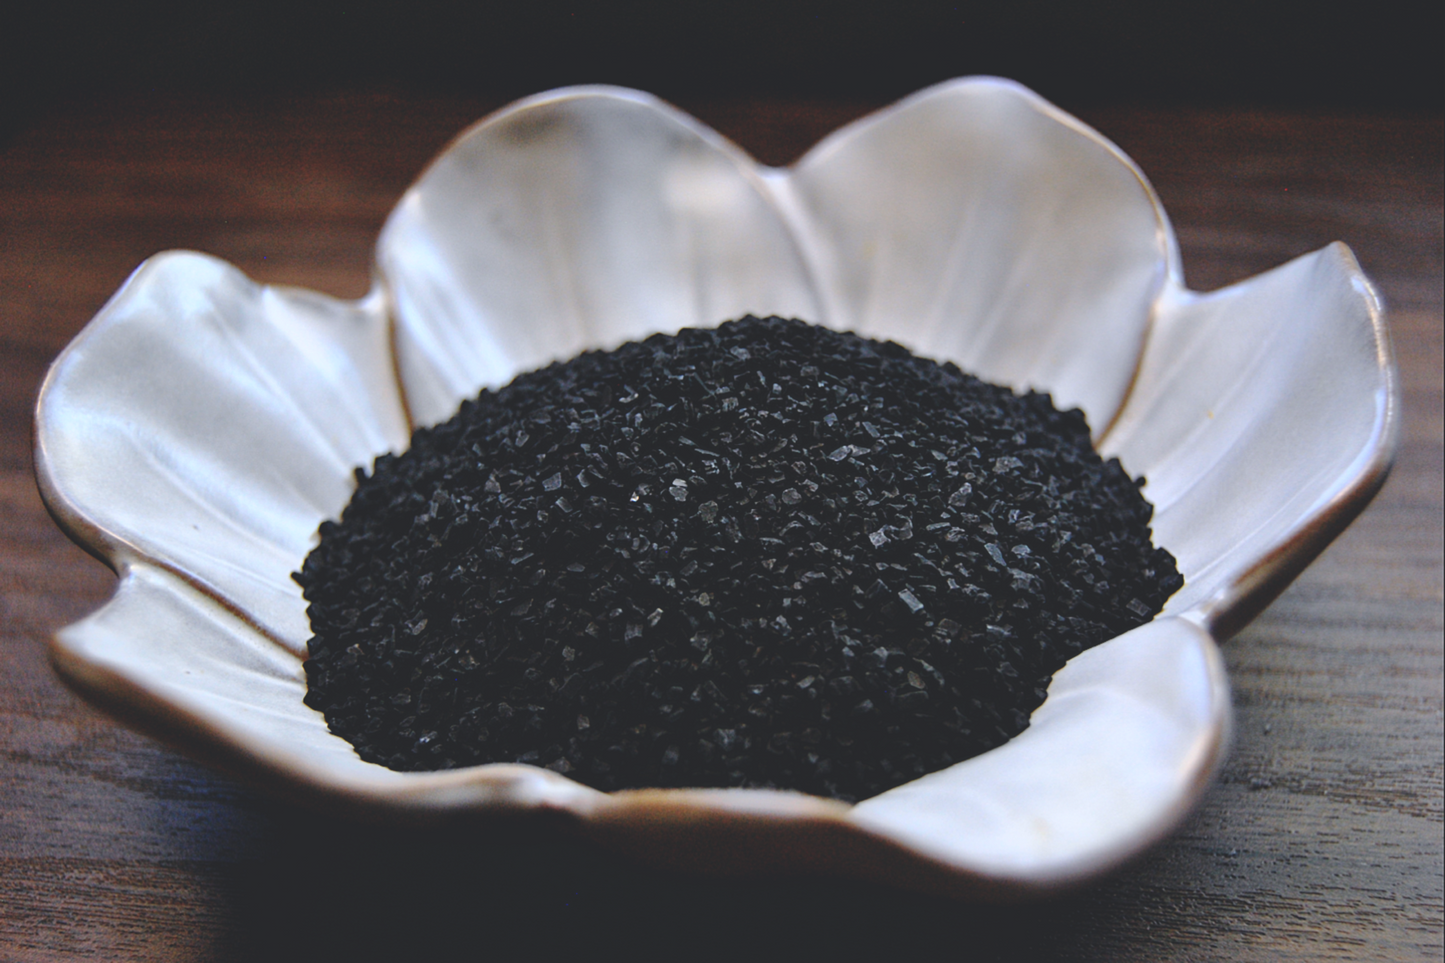 A photo of the black hawaiian sea salt in a small, white, flower shaped dish.